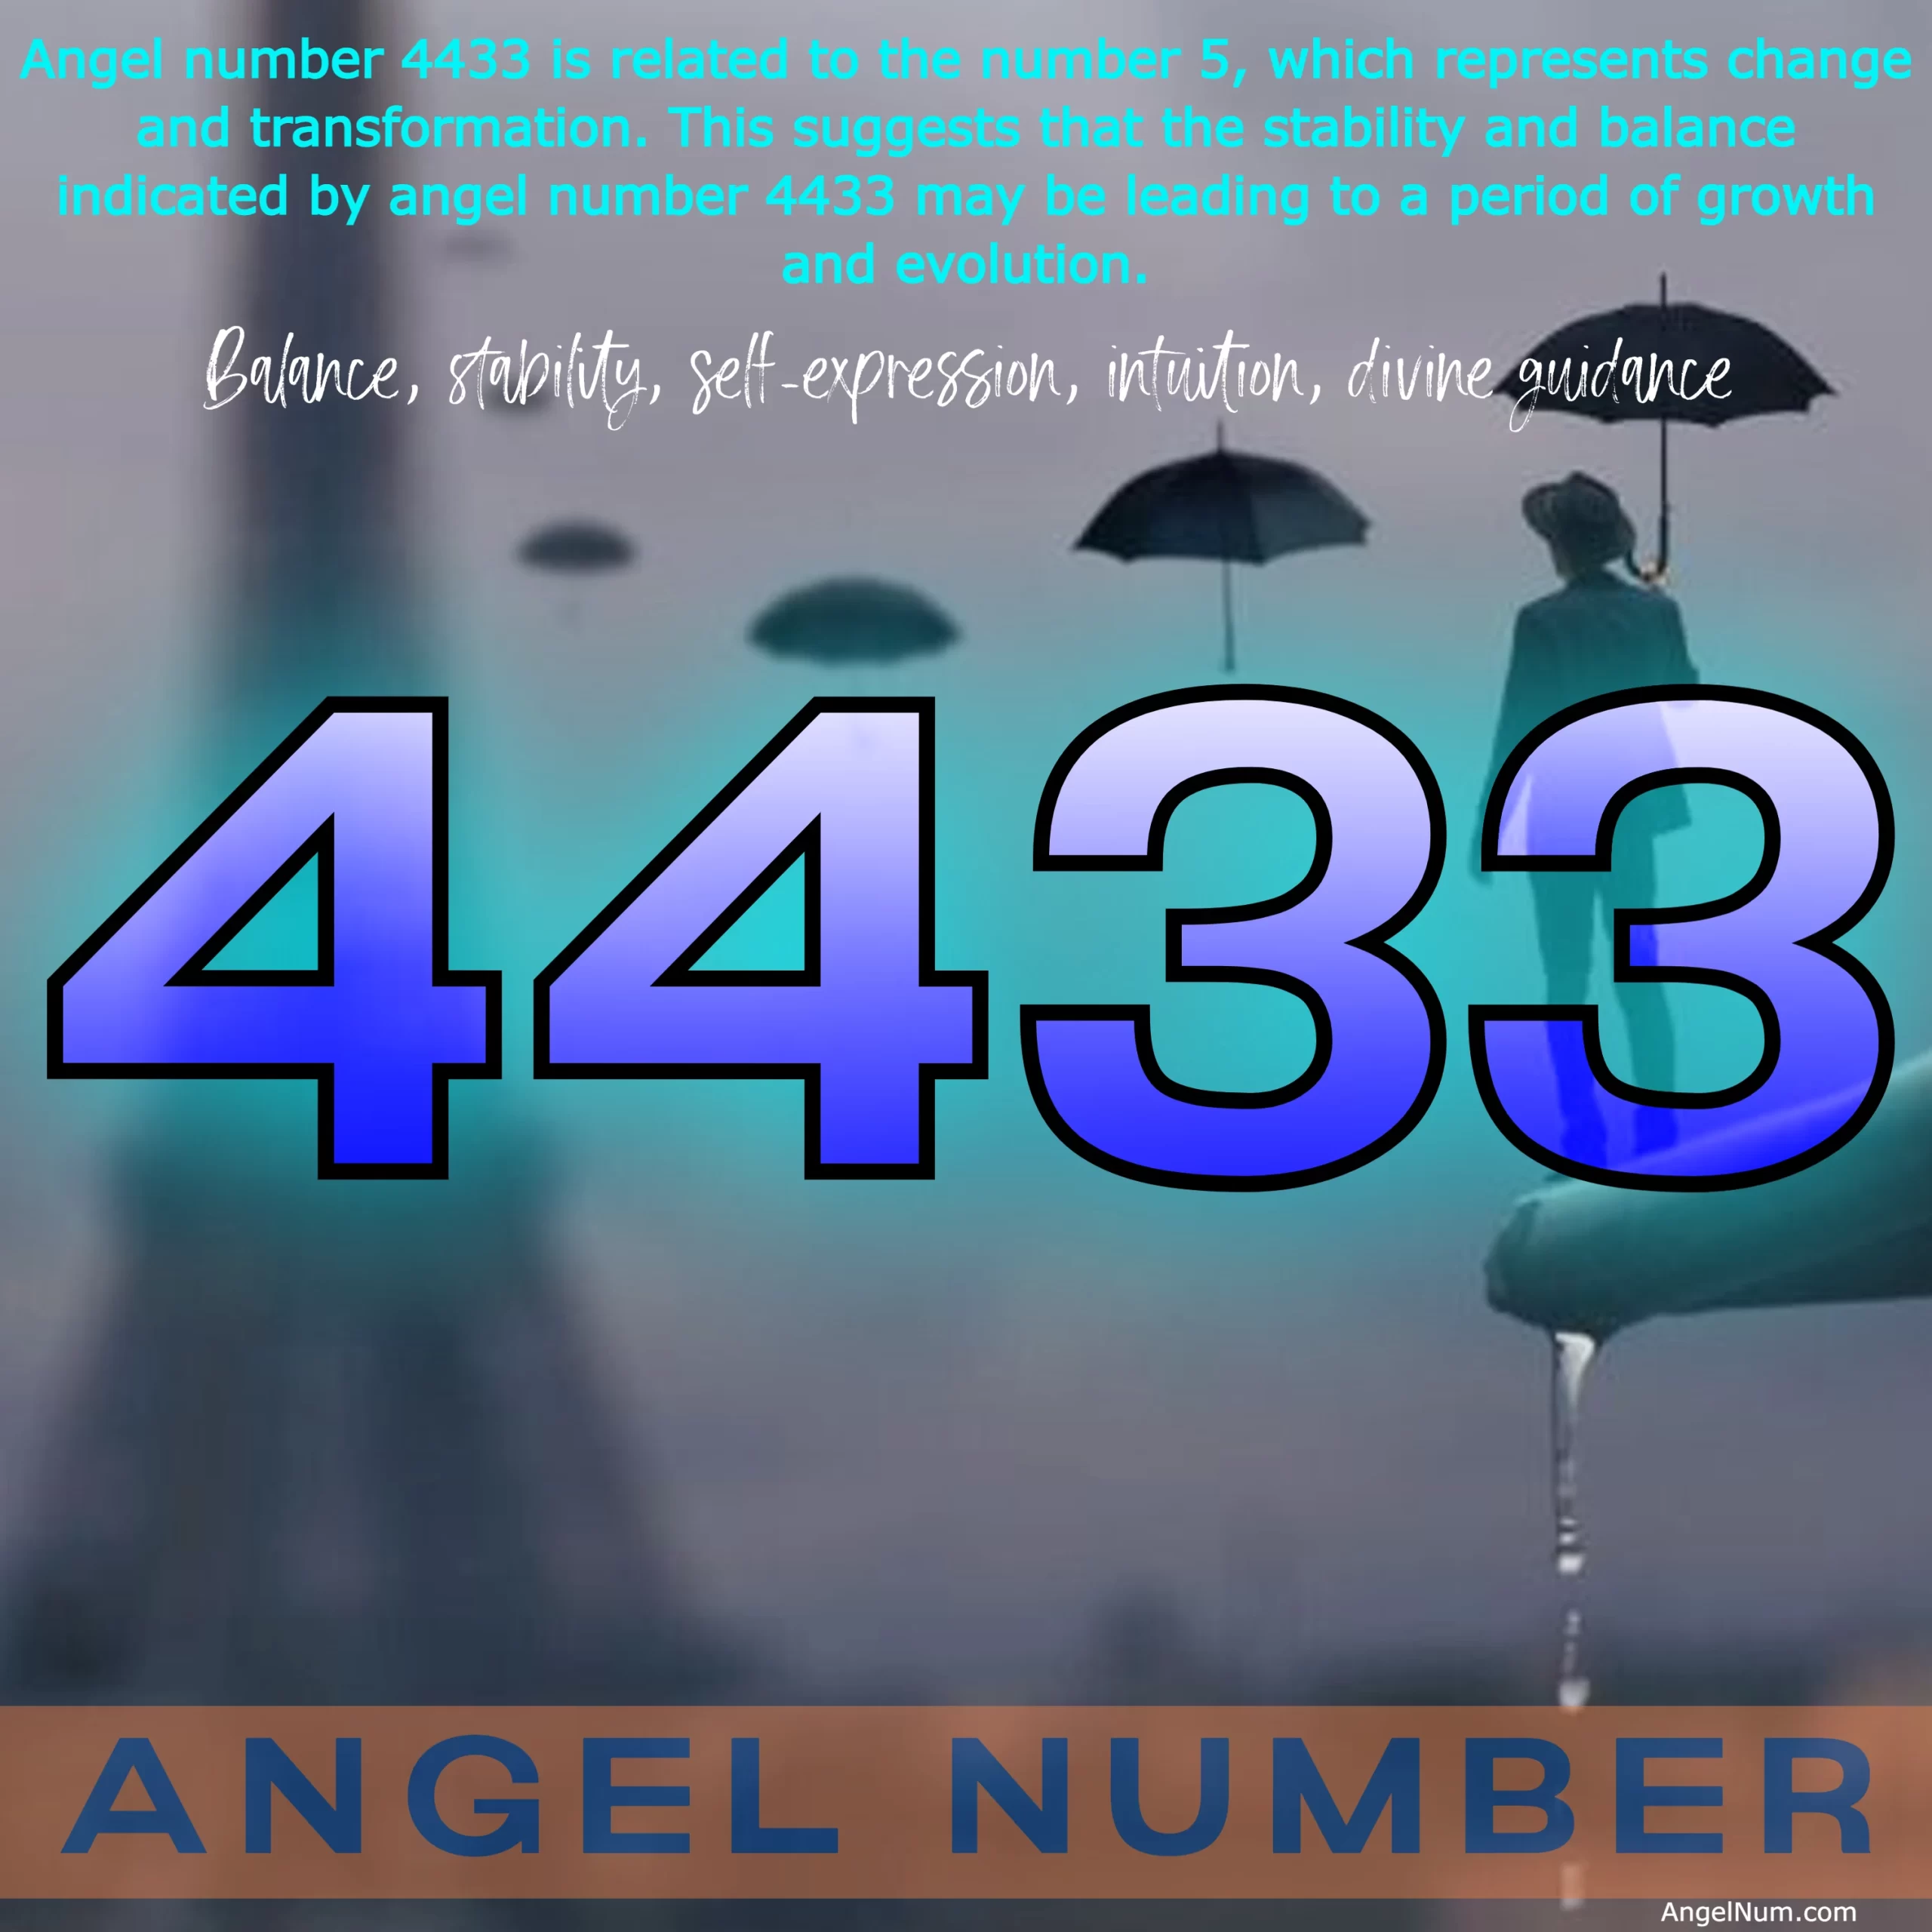 Exploring the Powerful Guidance of Angel Number 4433